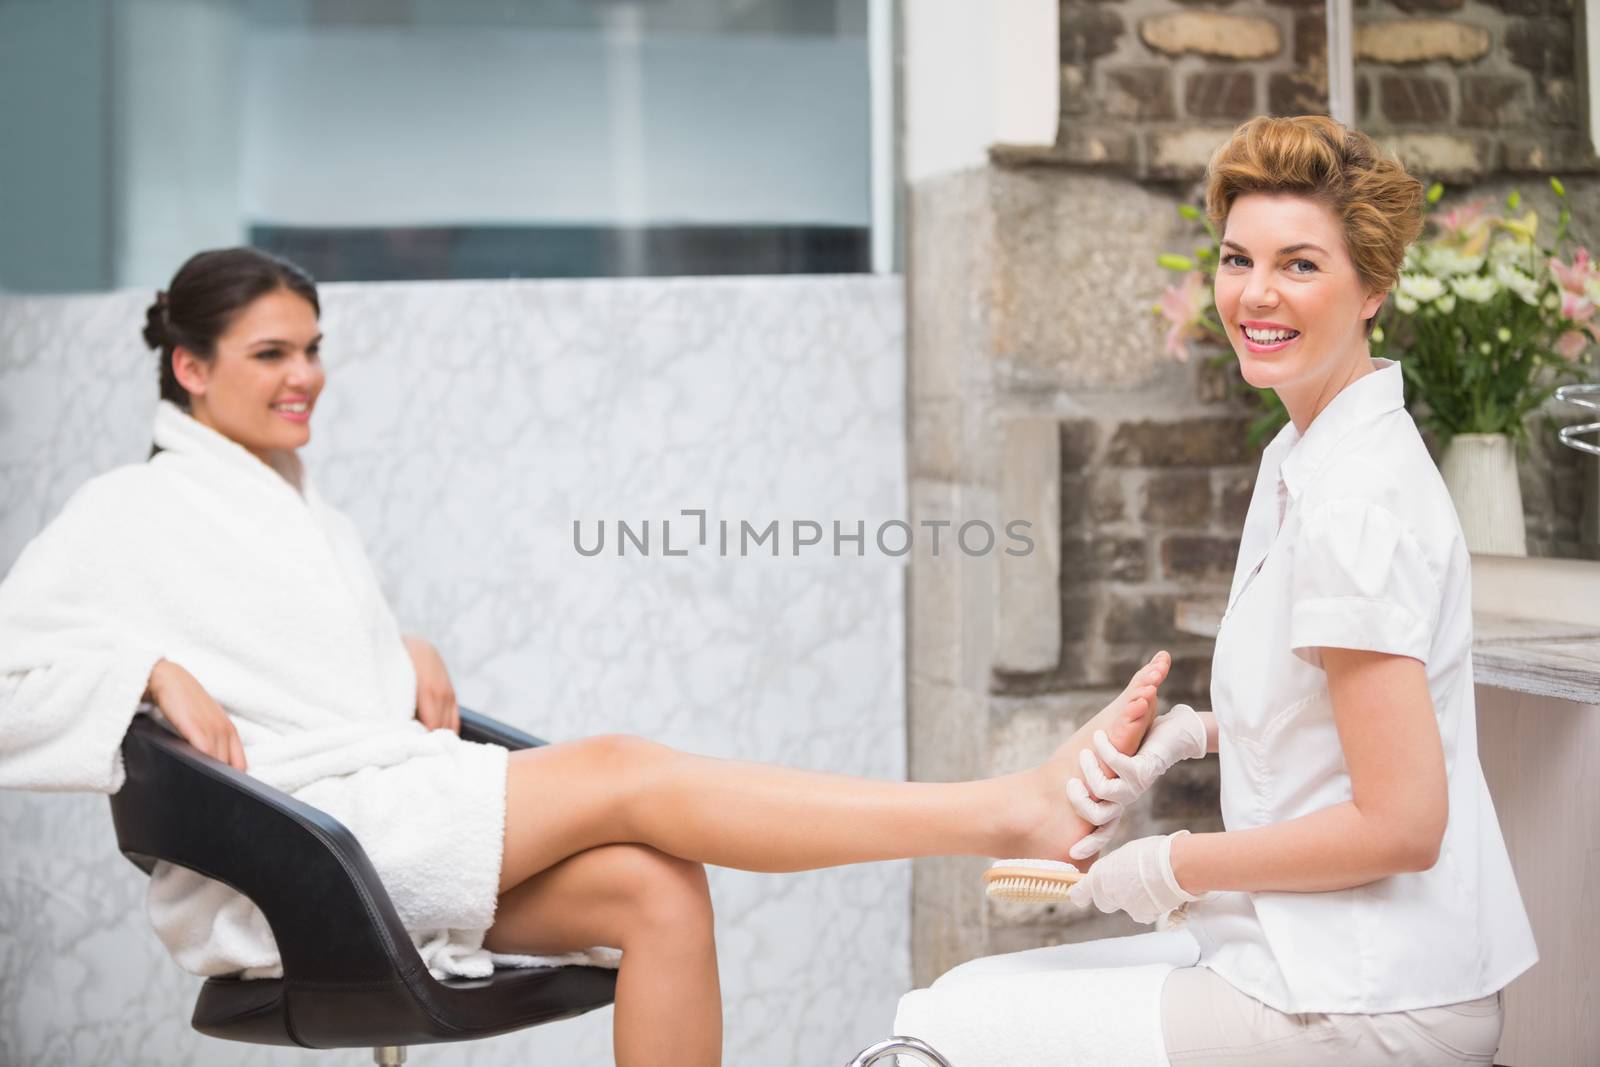 Woman getting a pedicure from beautician at the beauty salon